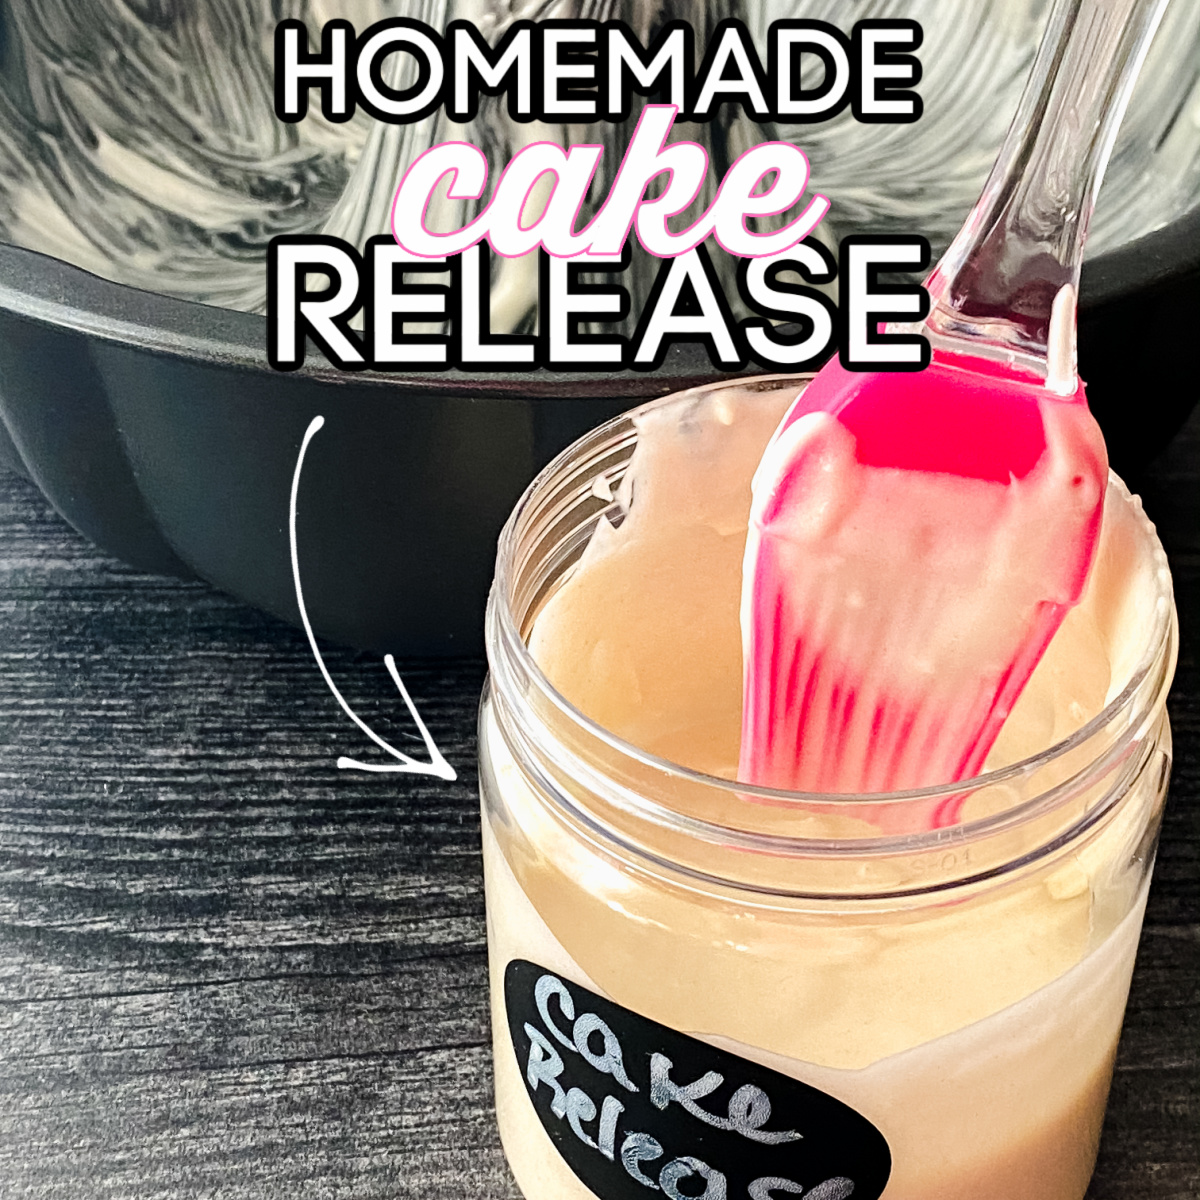 How to Make Homemade Cake Release to Get Your Baked Goods Out of